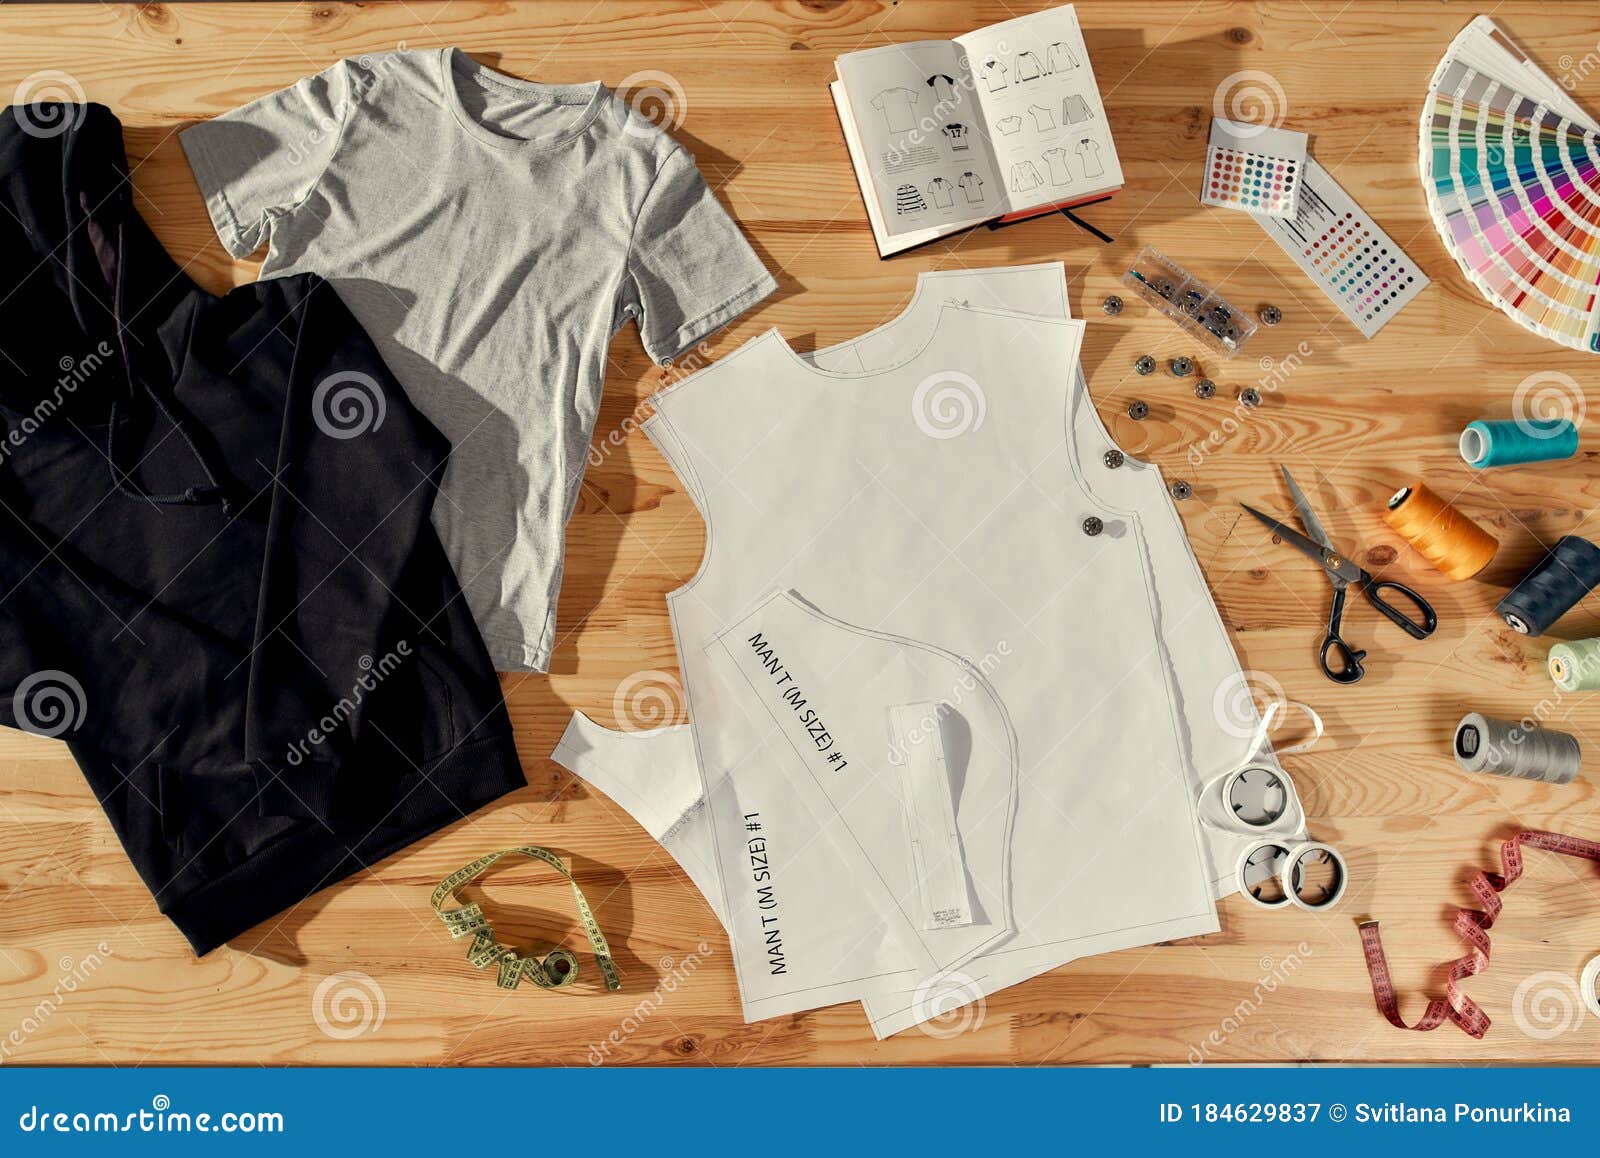 Workspace for Designer. Top view of neatly folded custom t shirts and  arranged baseball caps. Samples of fabric, stickers with text, tape measure  and notebooks lying on a wooden background. Stock Photo